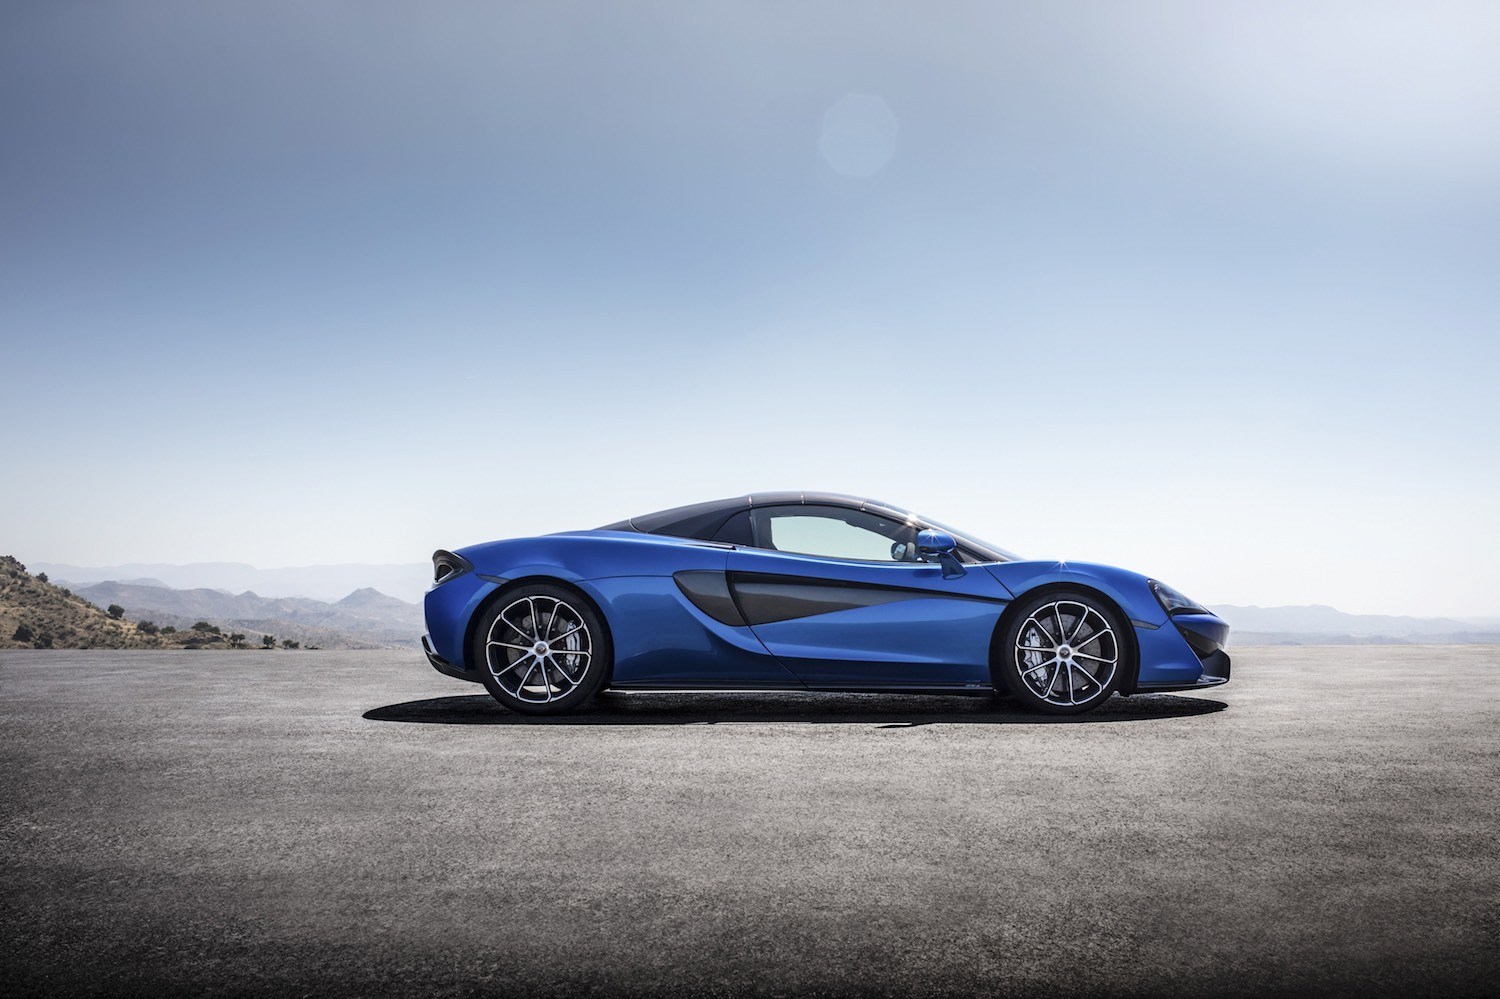 Neil Lyndon reviews the latest New McLaren 720S Spider for Drive 14